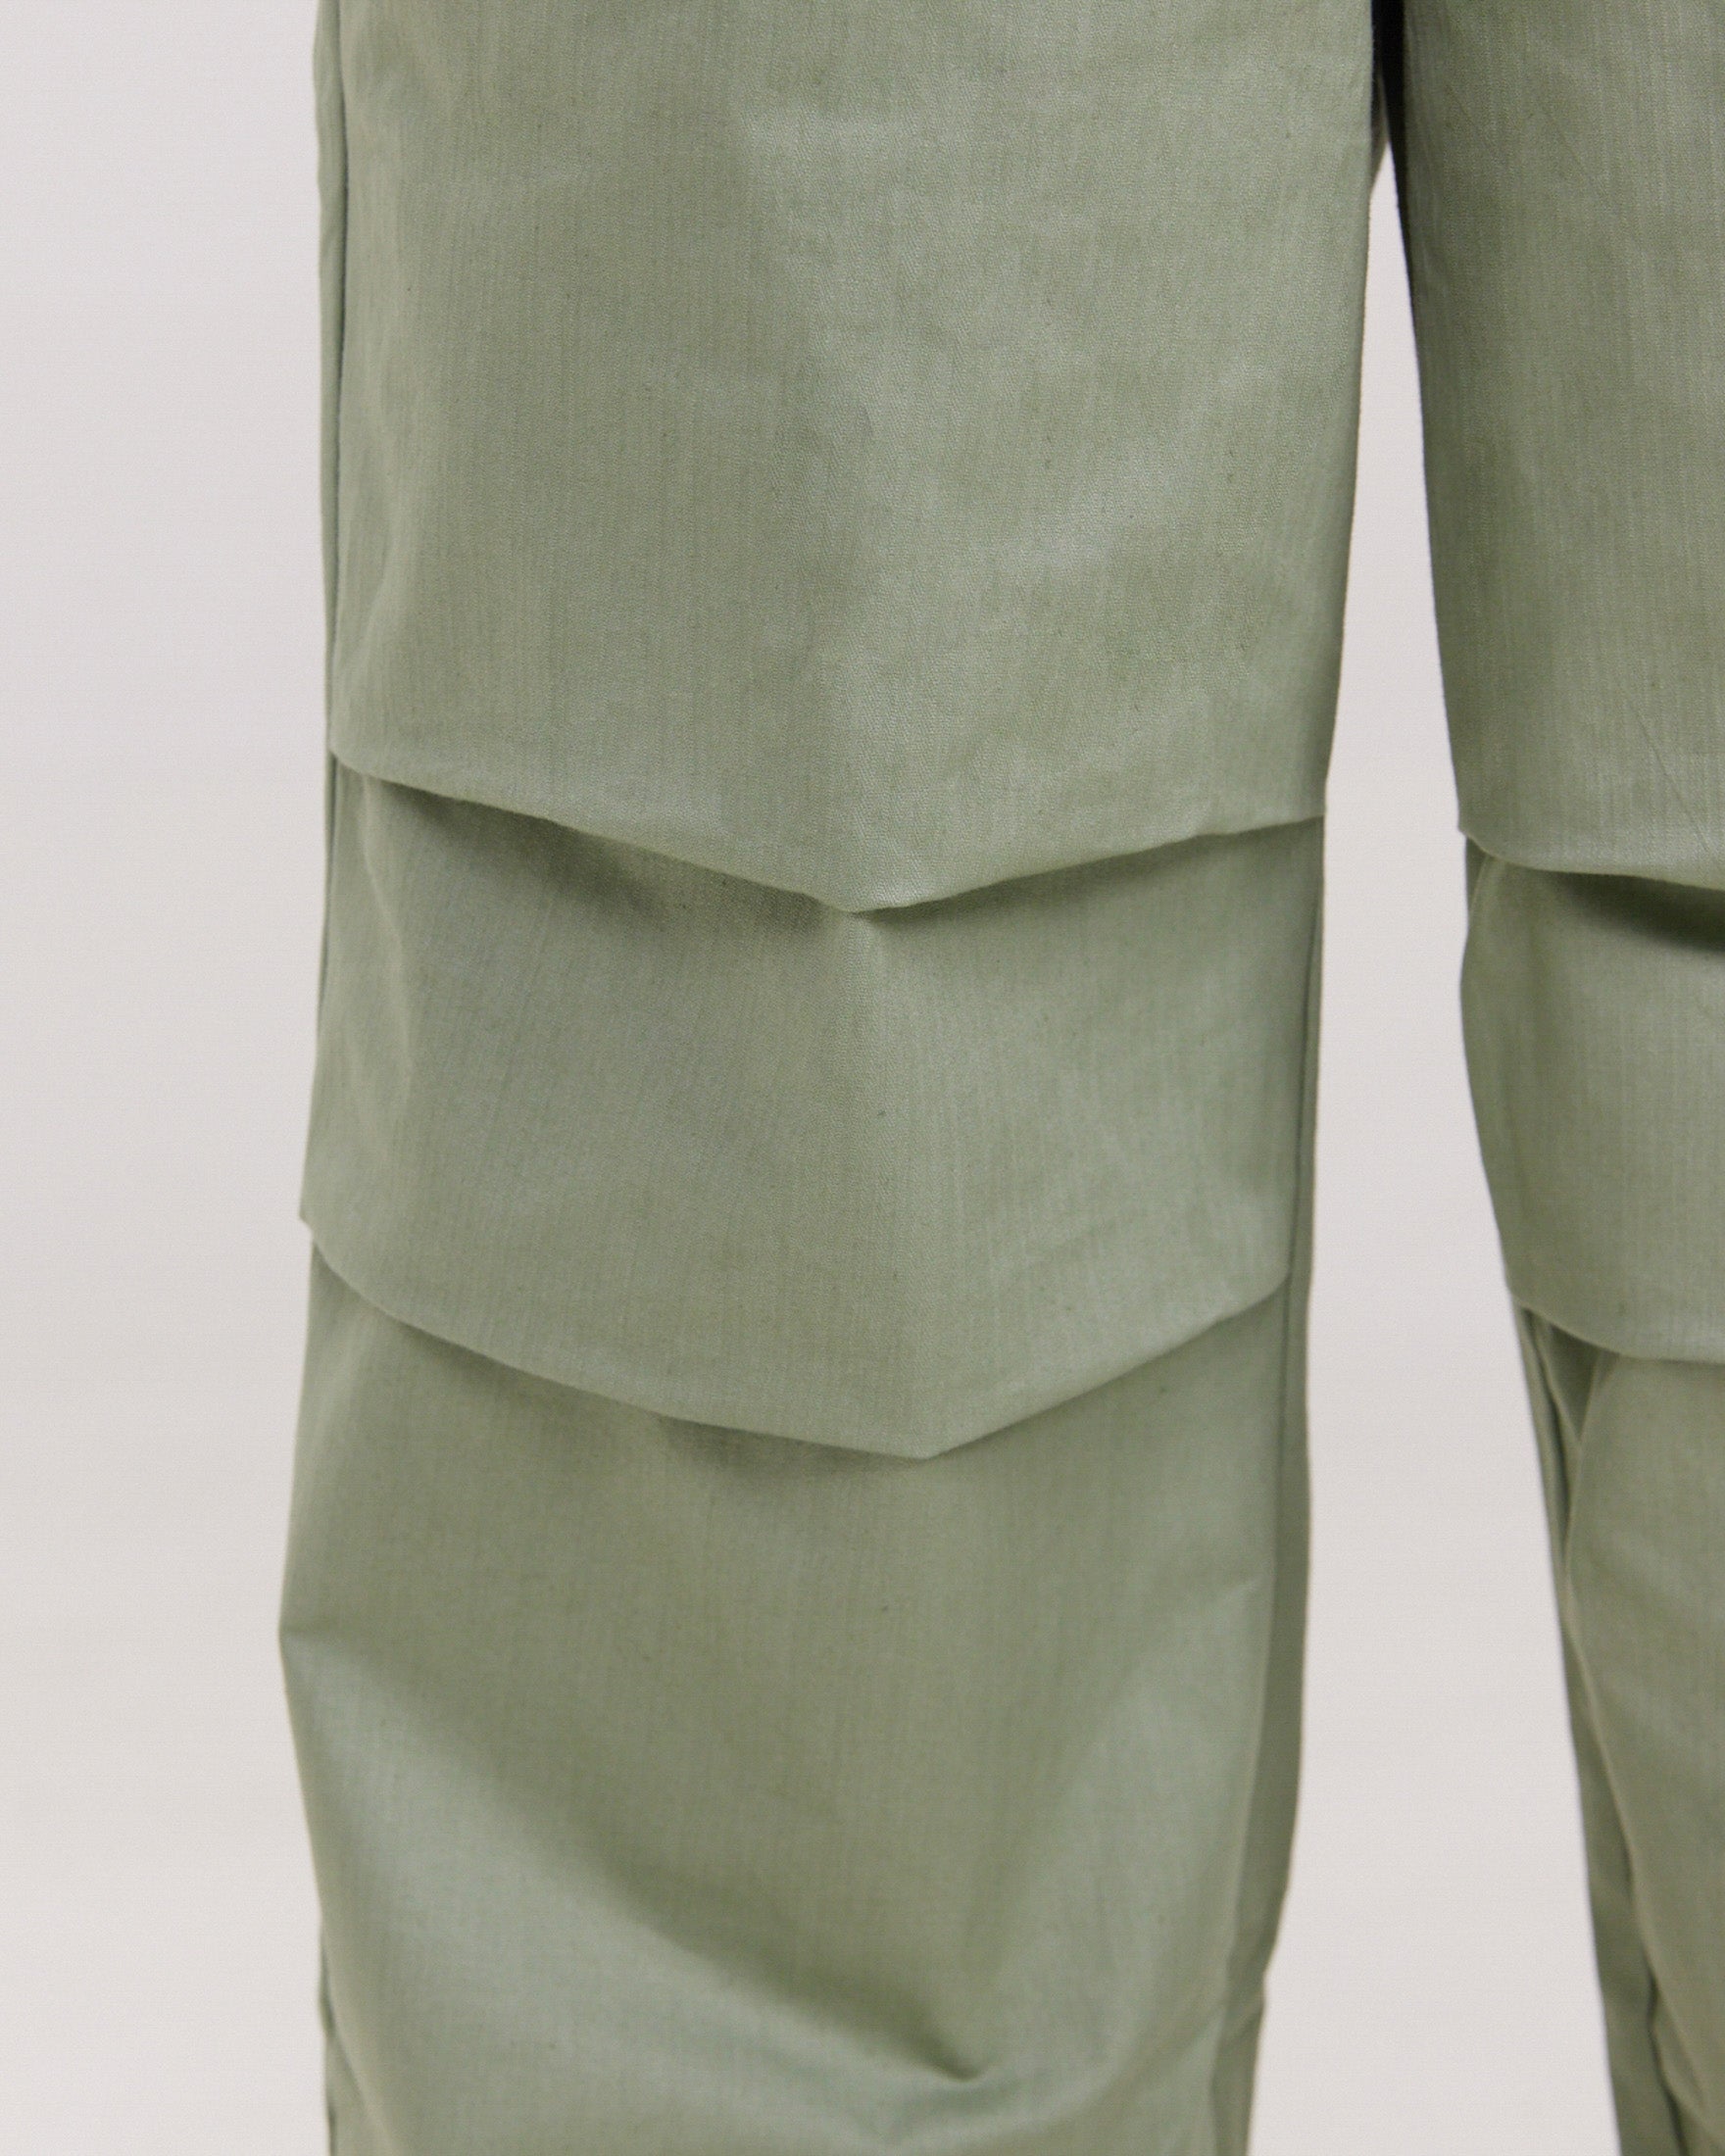 green utility pant with darts